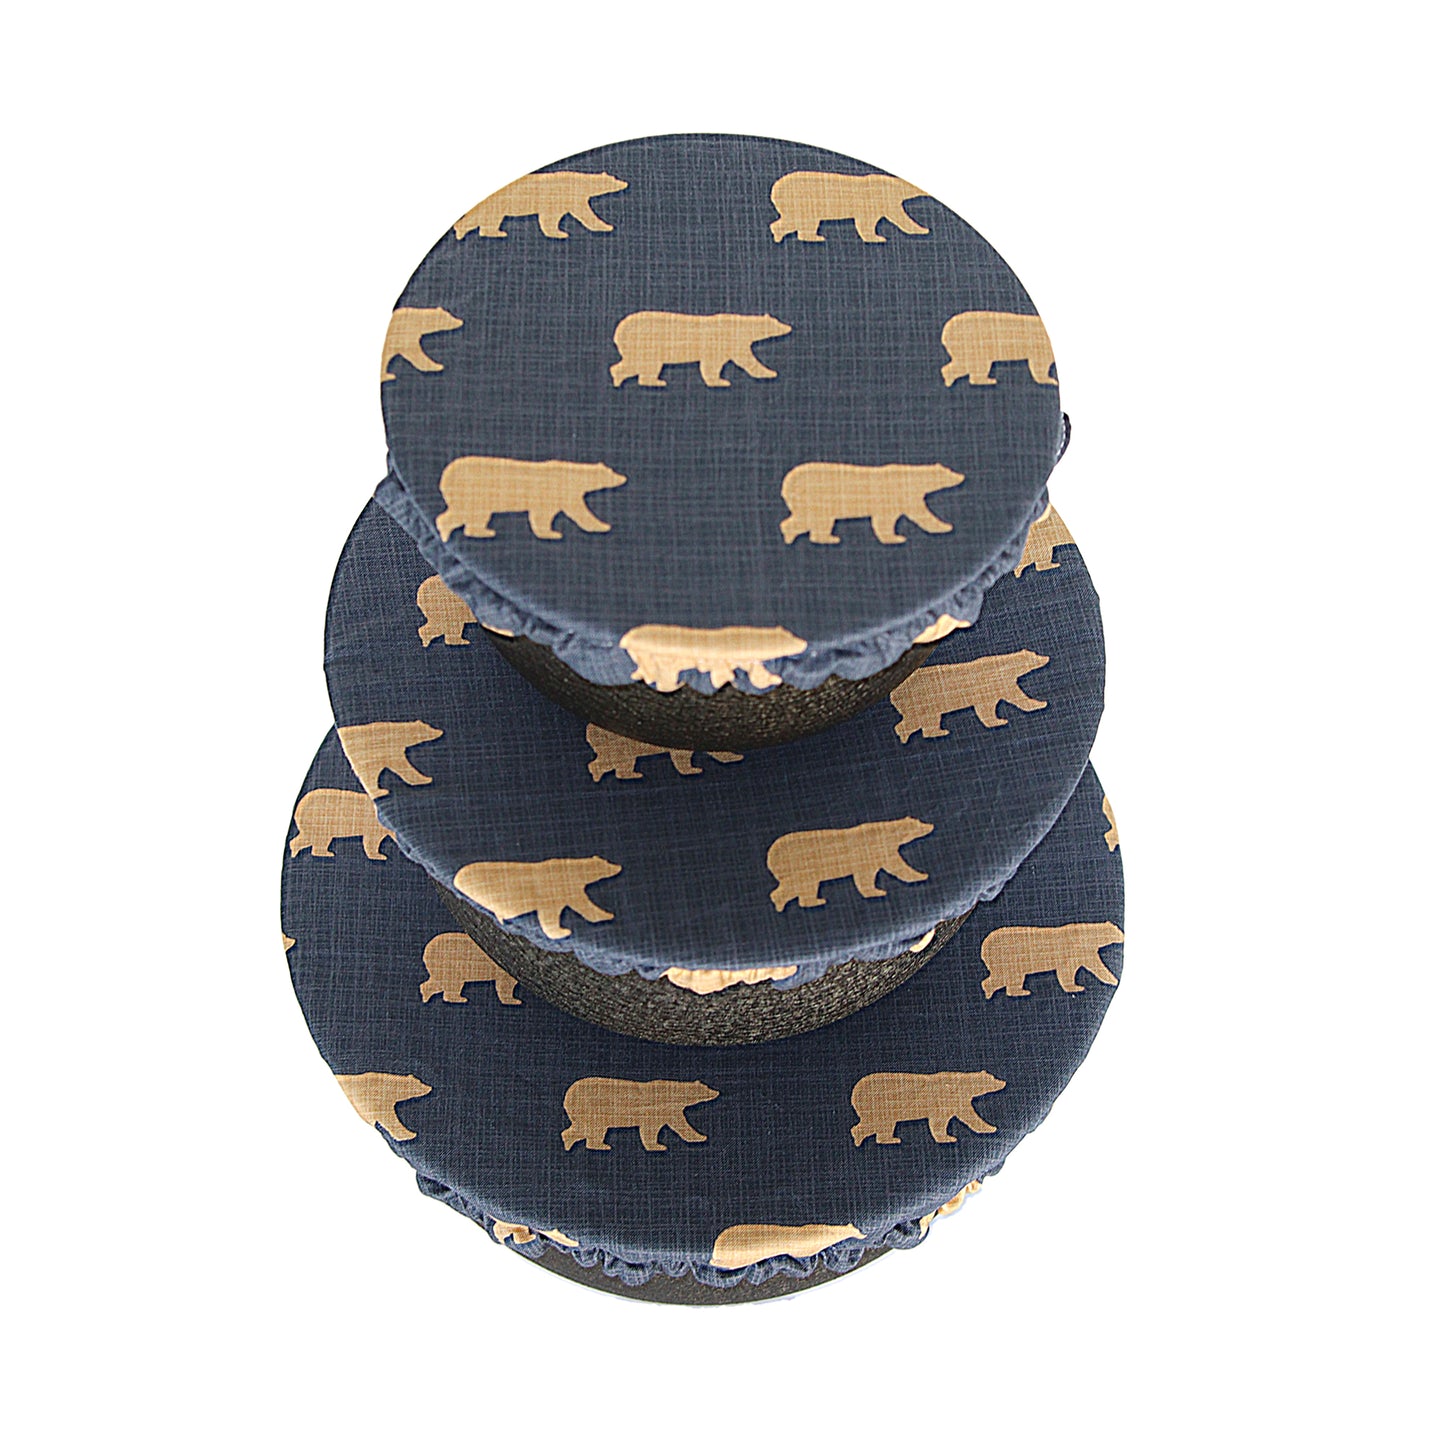 Small Bowl Cover - Bears